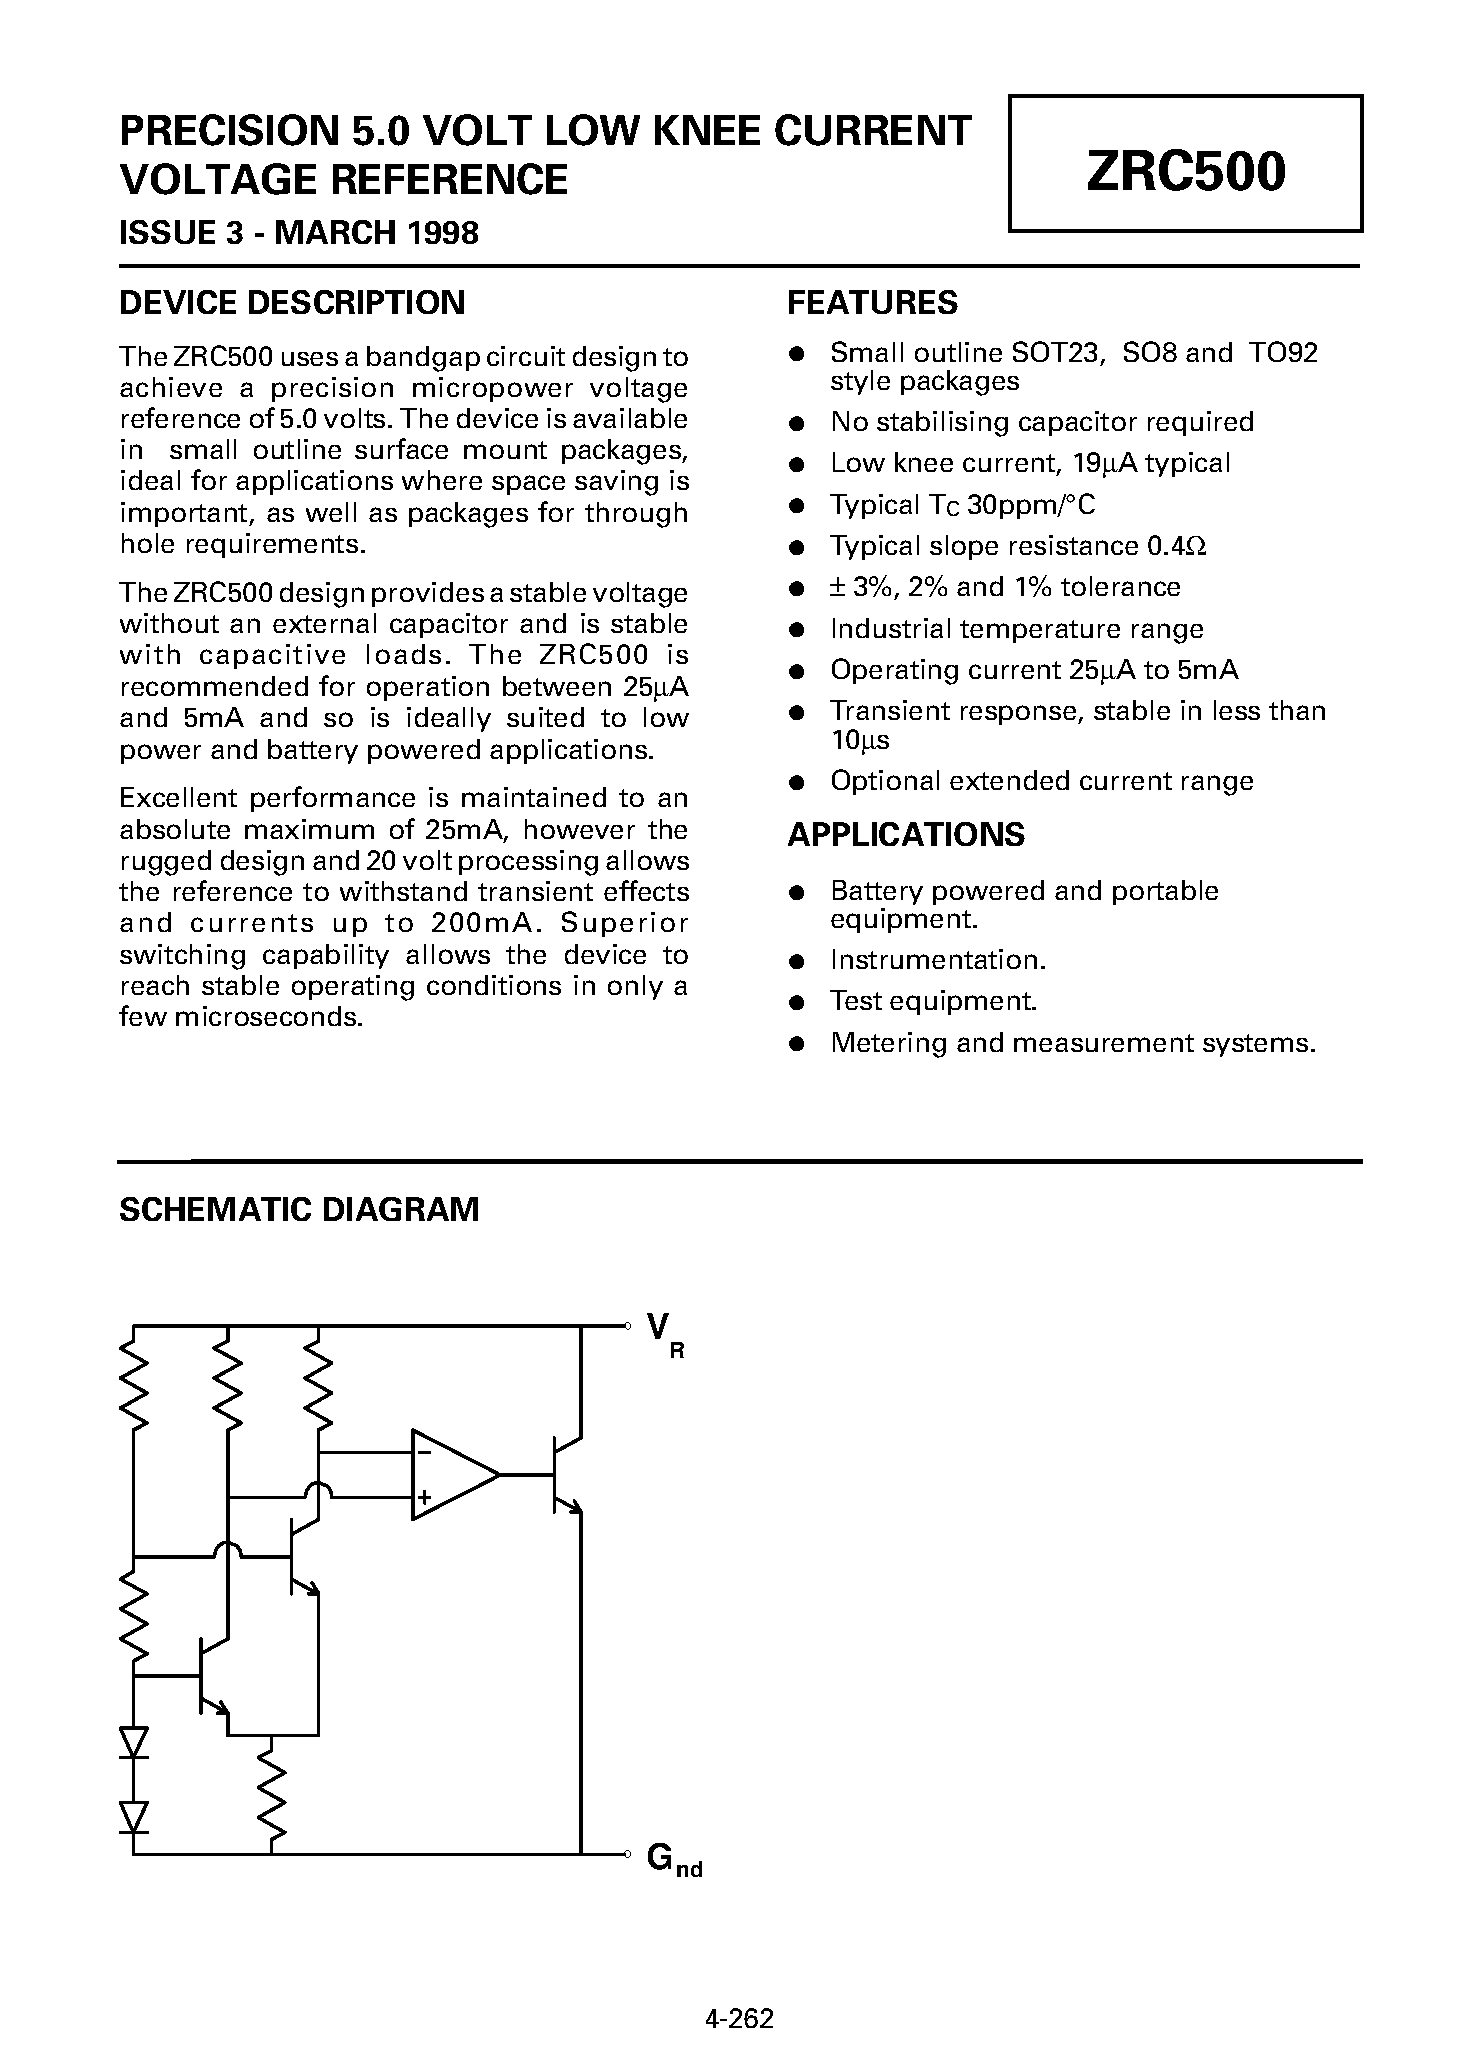 Datasheet ZRC500A02 - PRECISION 5.0 VOLT LOW KNEE CURRENT VOLTAGE REFERENCE page 1